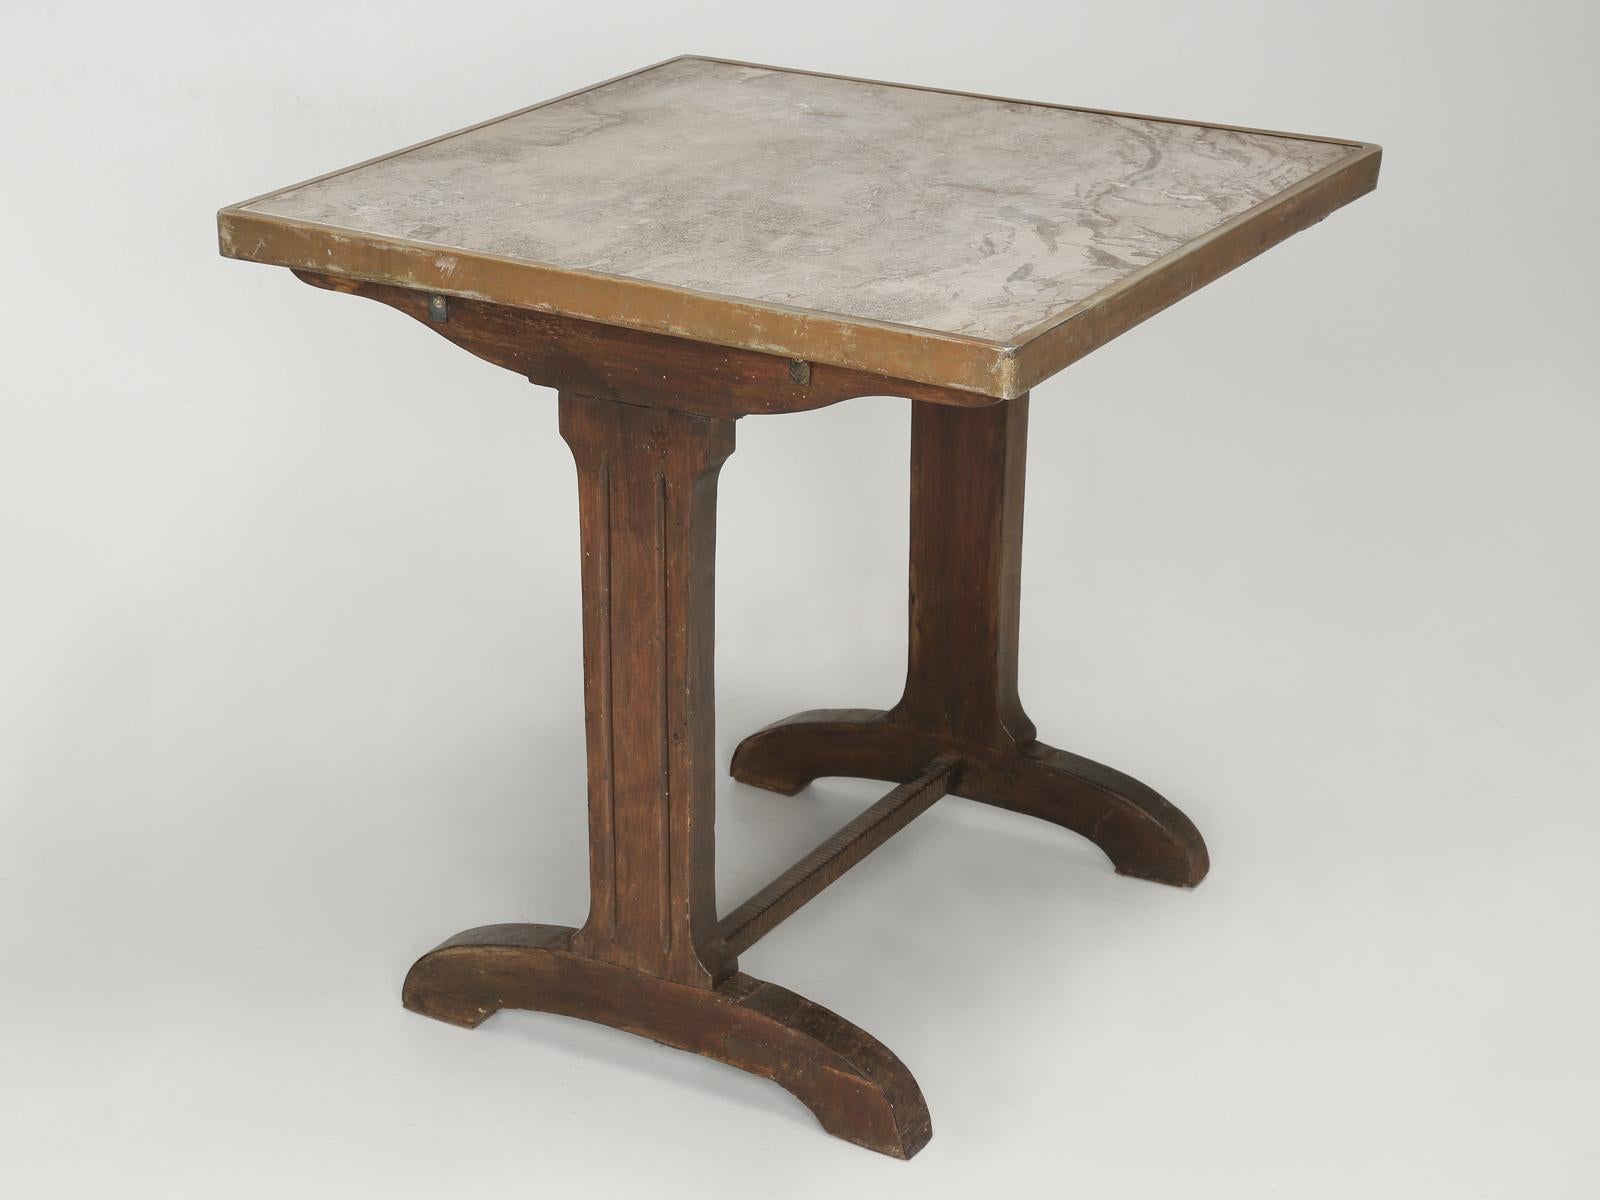 Antique French Bistro table in a very unusual square shape. Judging by the wear on the marble top, our best guess is that this was made in the early 1900’s. Please note all the surface scratches on the marble bistro table top and old repairs at the